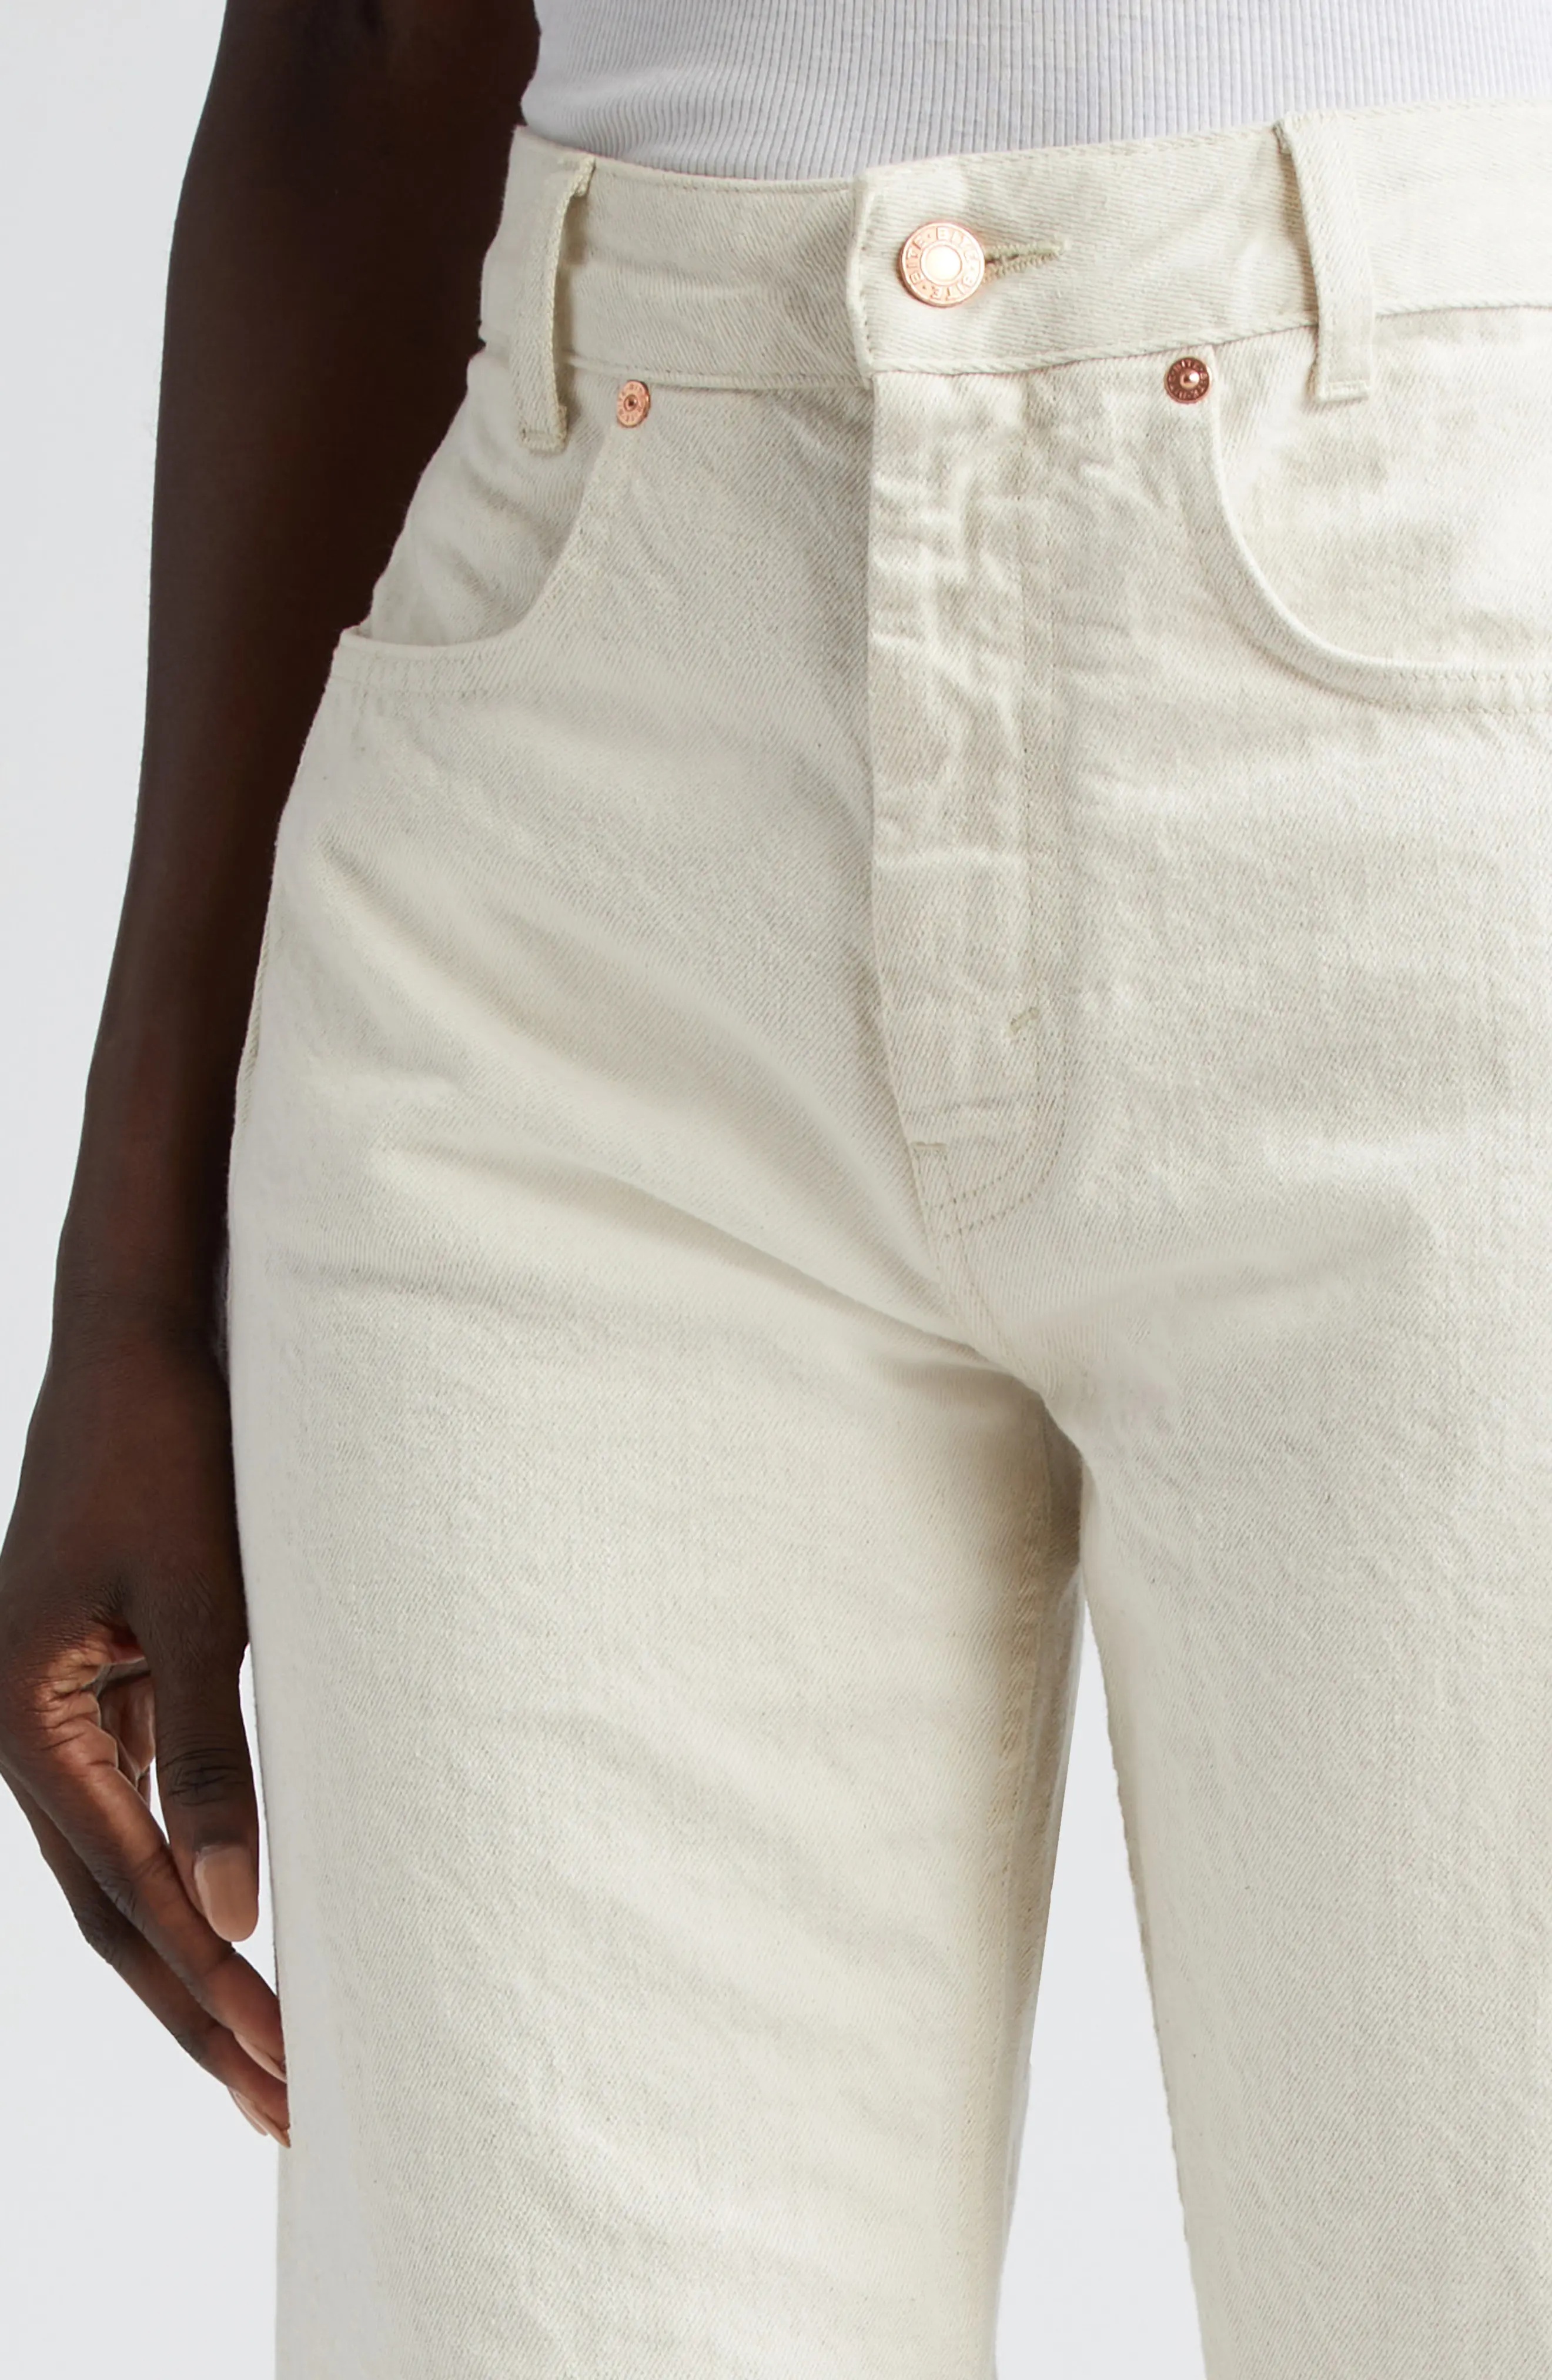 Curved Organic Cotton & Linen Jeans - 5